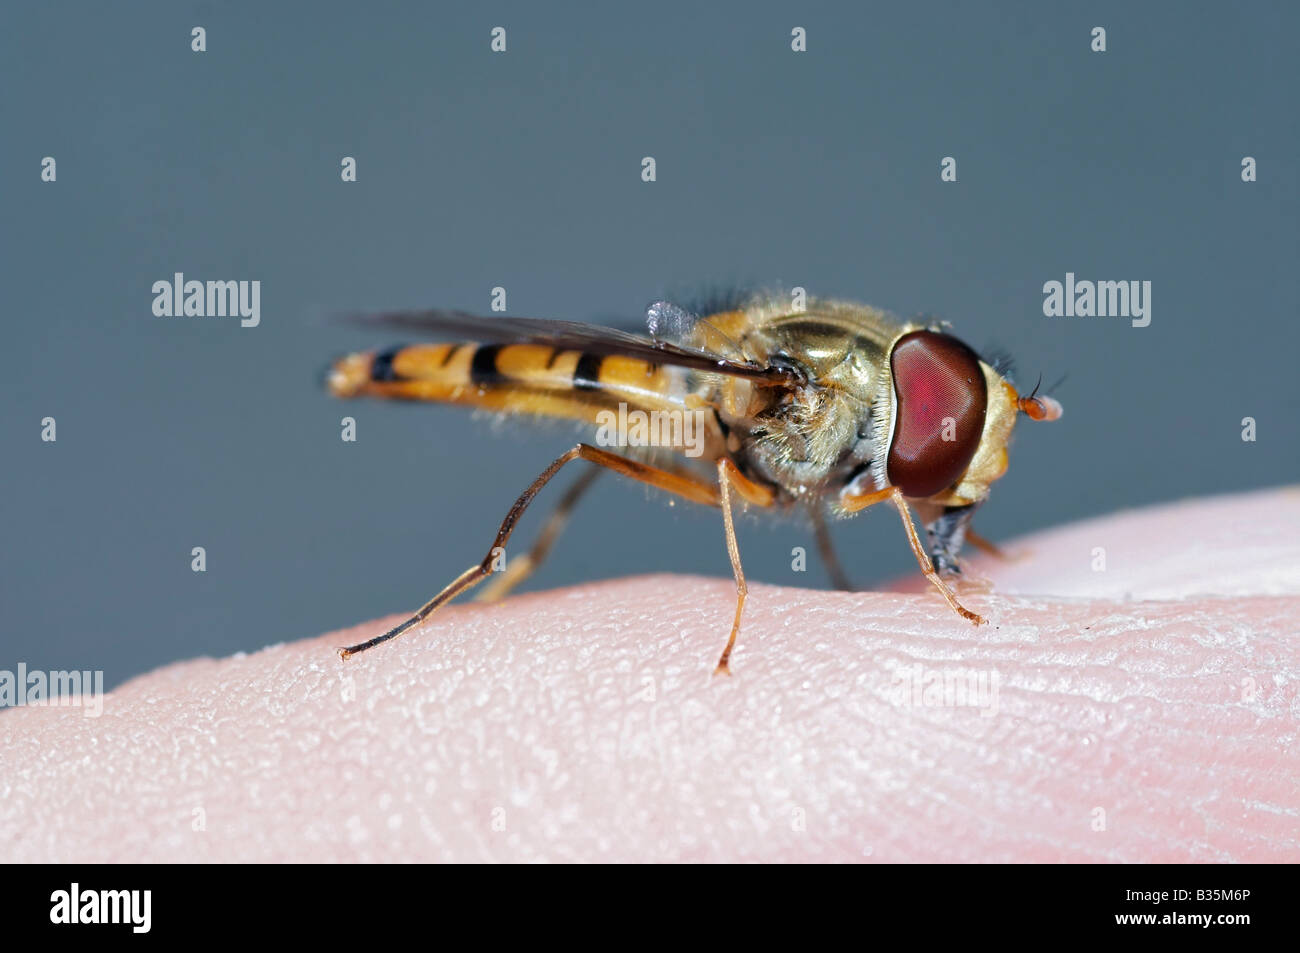 Close-up of the syrphid fly Stock Photo